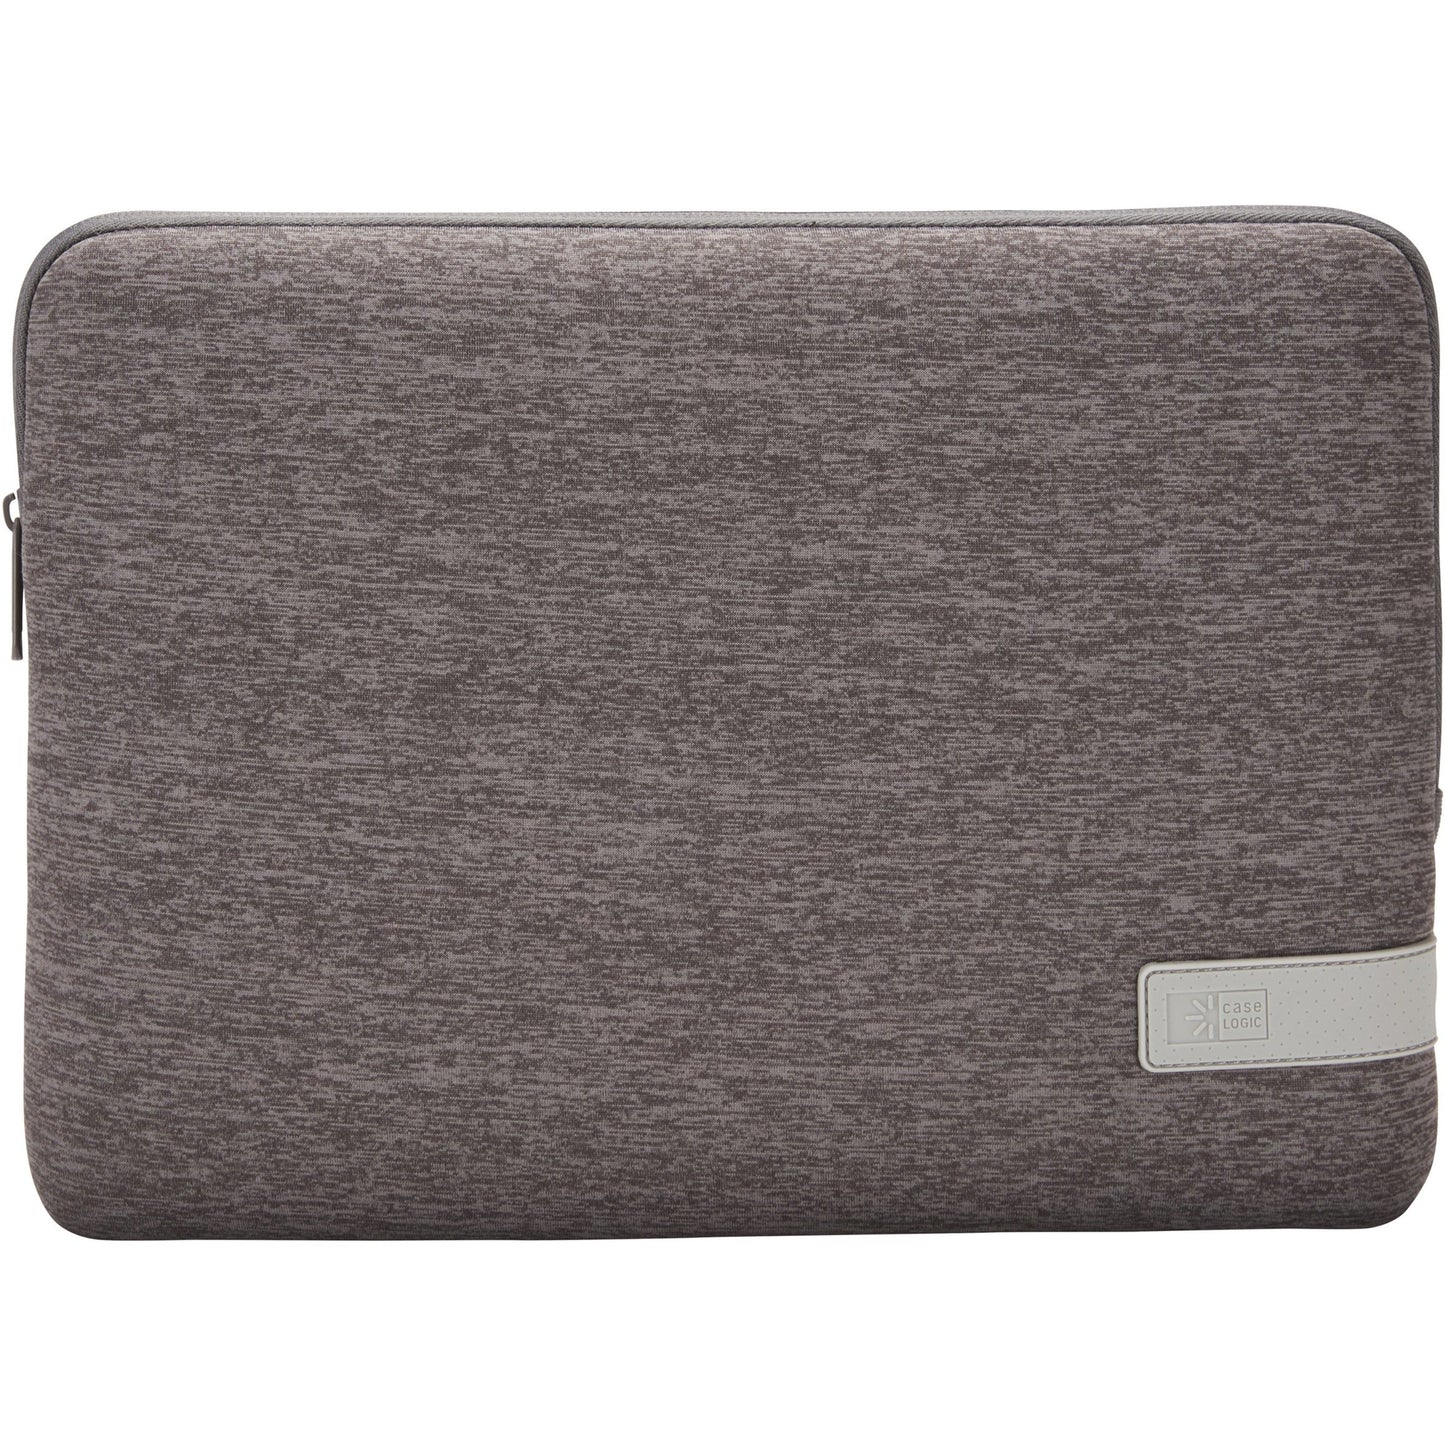 Case Logic Reflect REFMB-113 Carrying Case (Sleeve) for 13" Apple MacBook Pro - Graphite